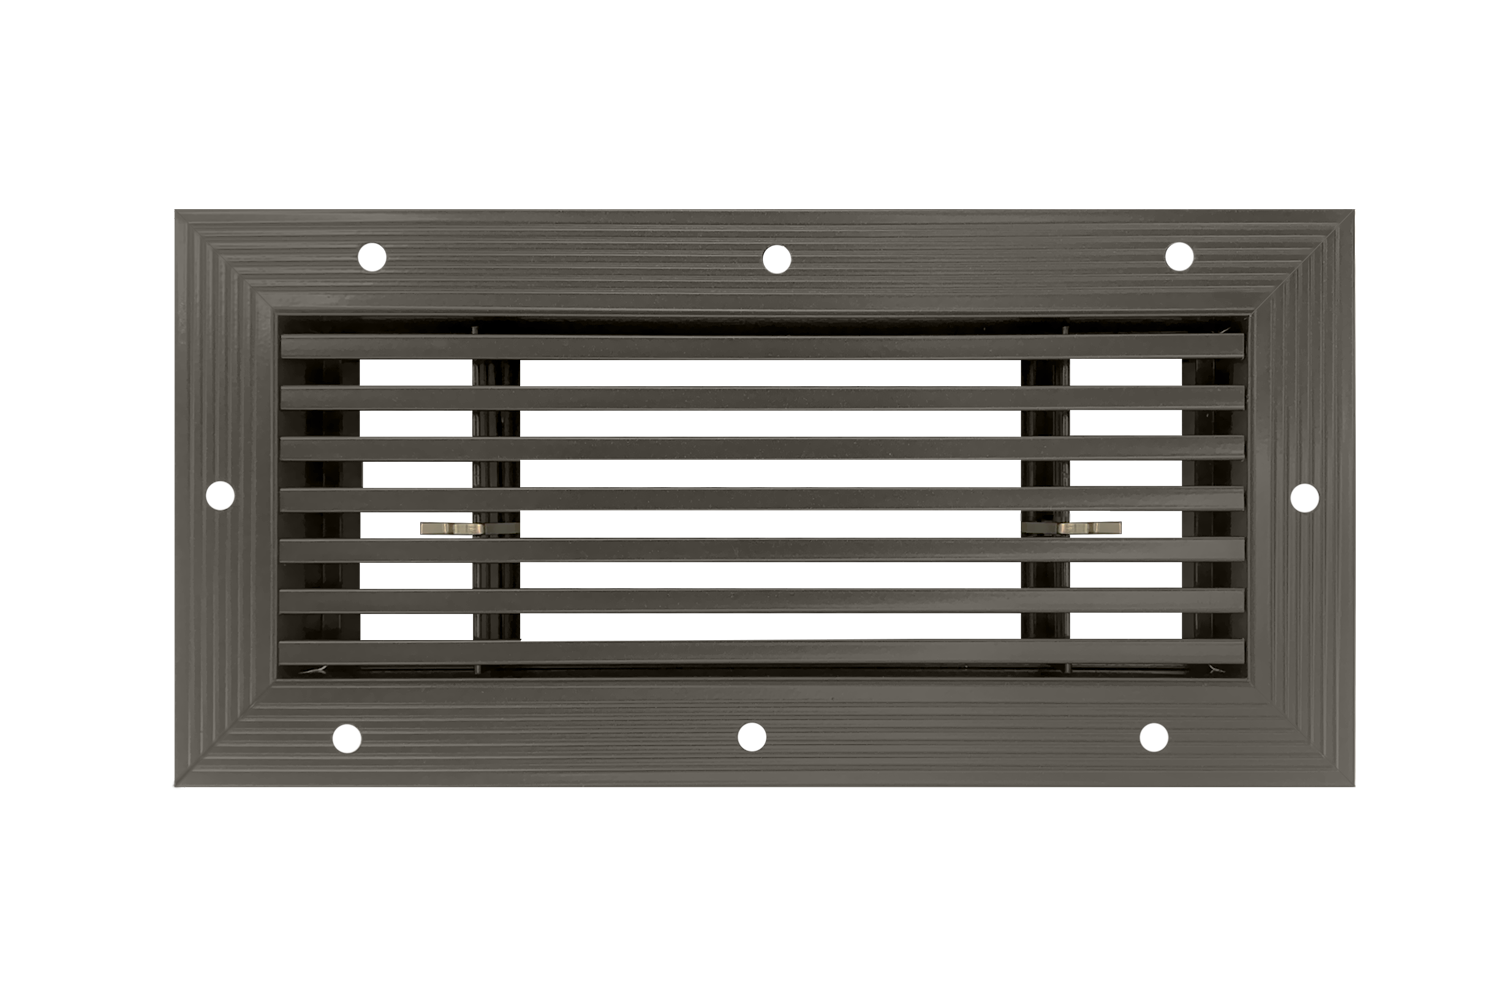 Dayus DABLRJ Removable Core Bar Linear Grille Concealed Brown Powdercoat